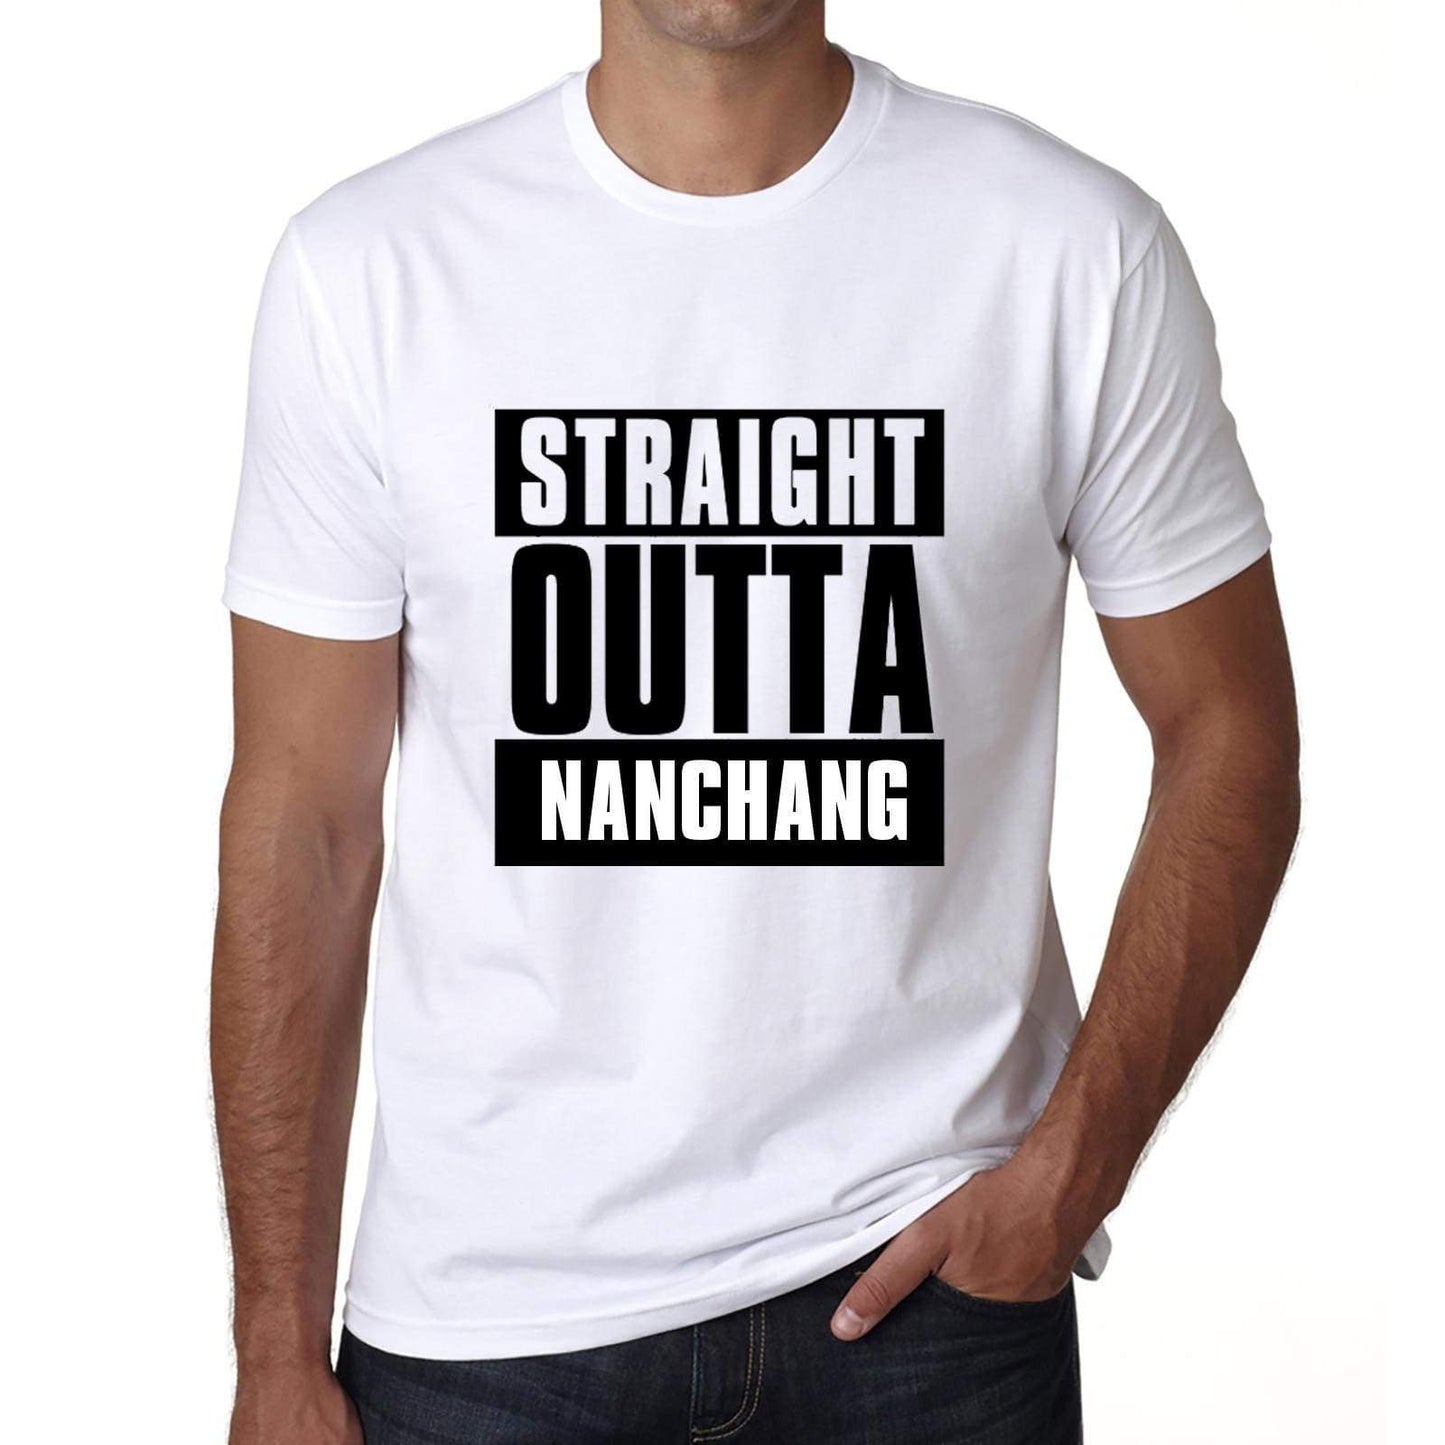 Straight Outta Nanchang Mens Short Sleeve Round Neck T-Shirt 00027 - White / S - Casual